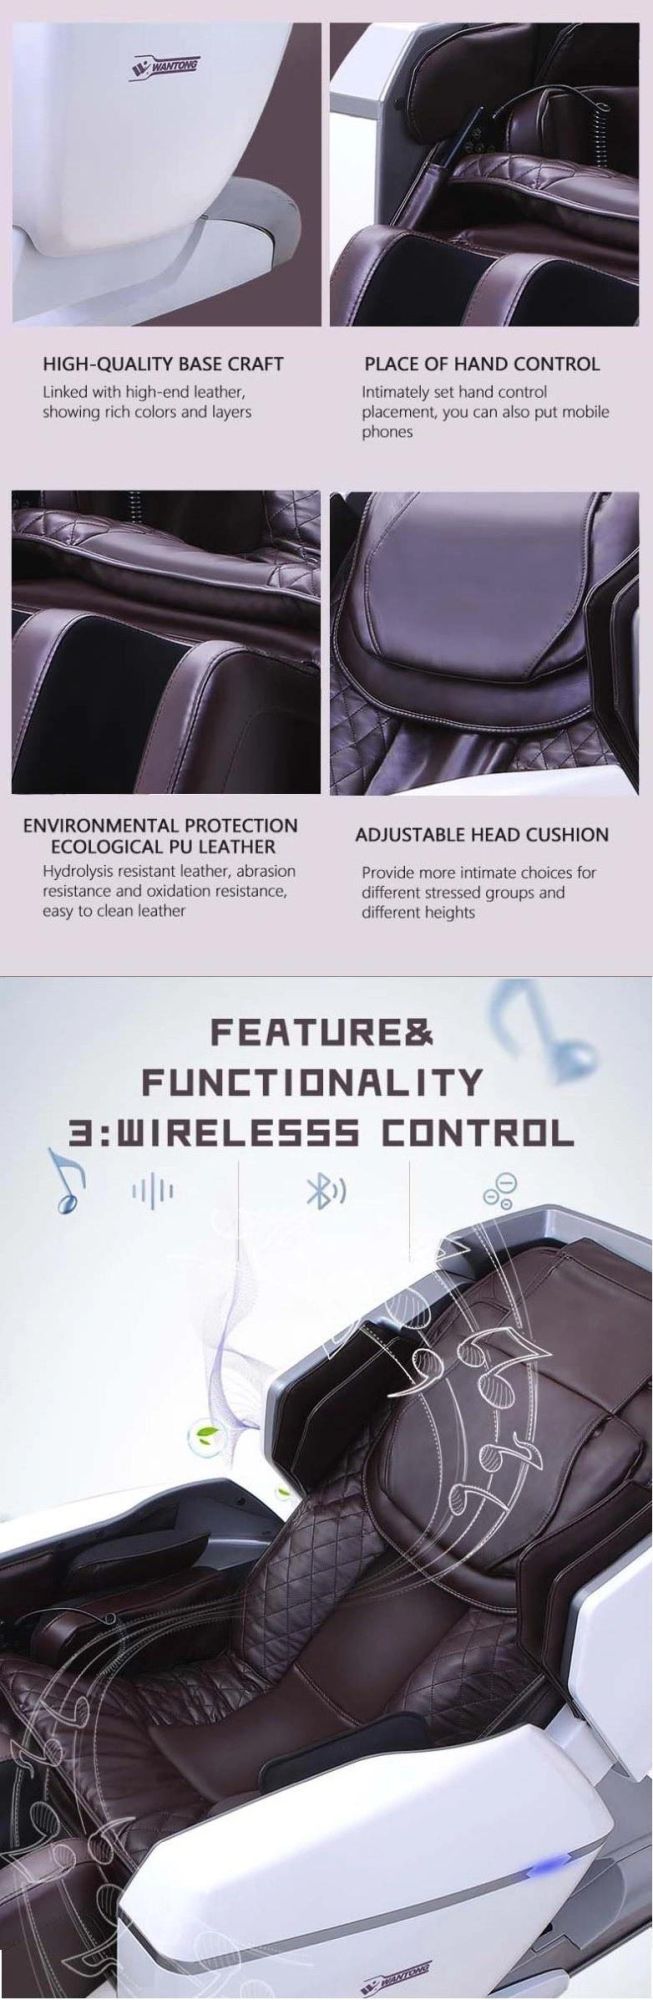 Brush Shiatsu Neck for with Pillow Heat and Electric Massager Massage Chair at Home and Office